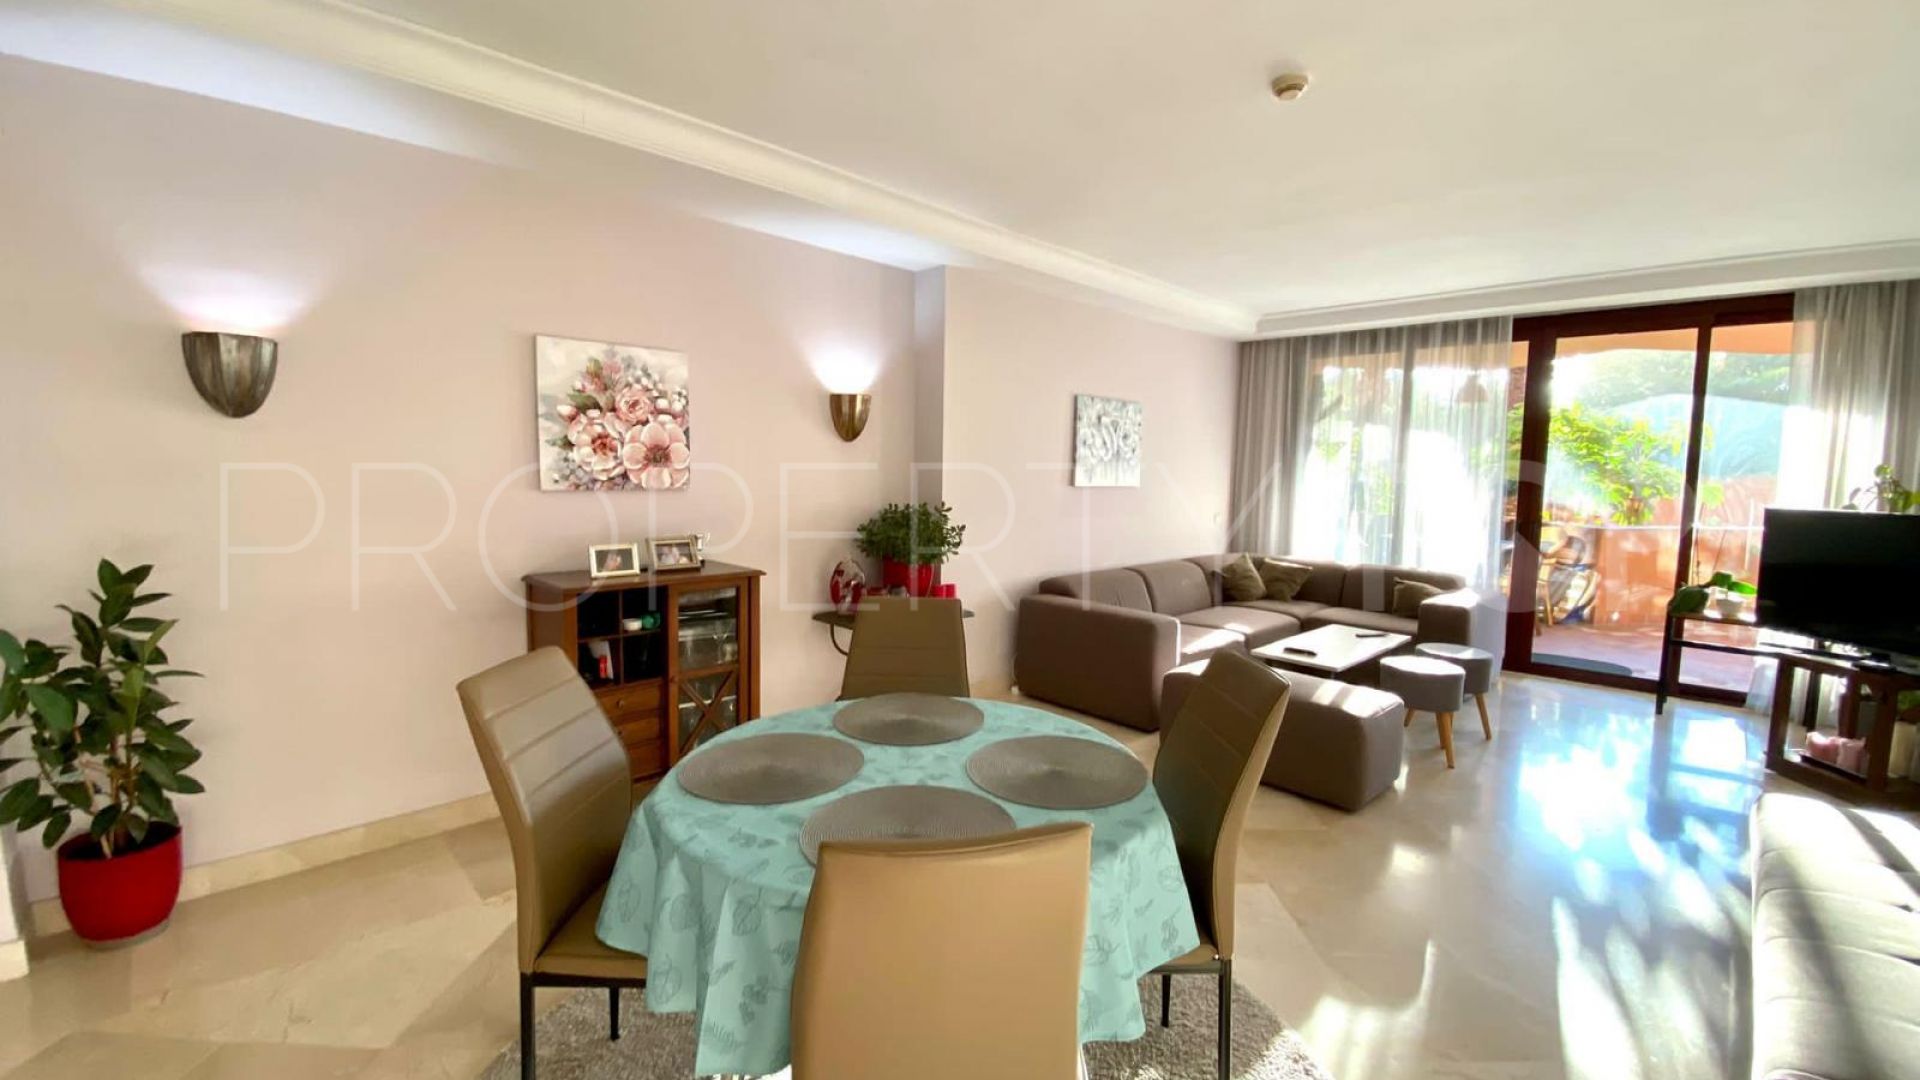 Apartment with 2 bedrooms for sale in Kempinski